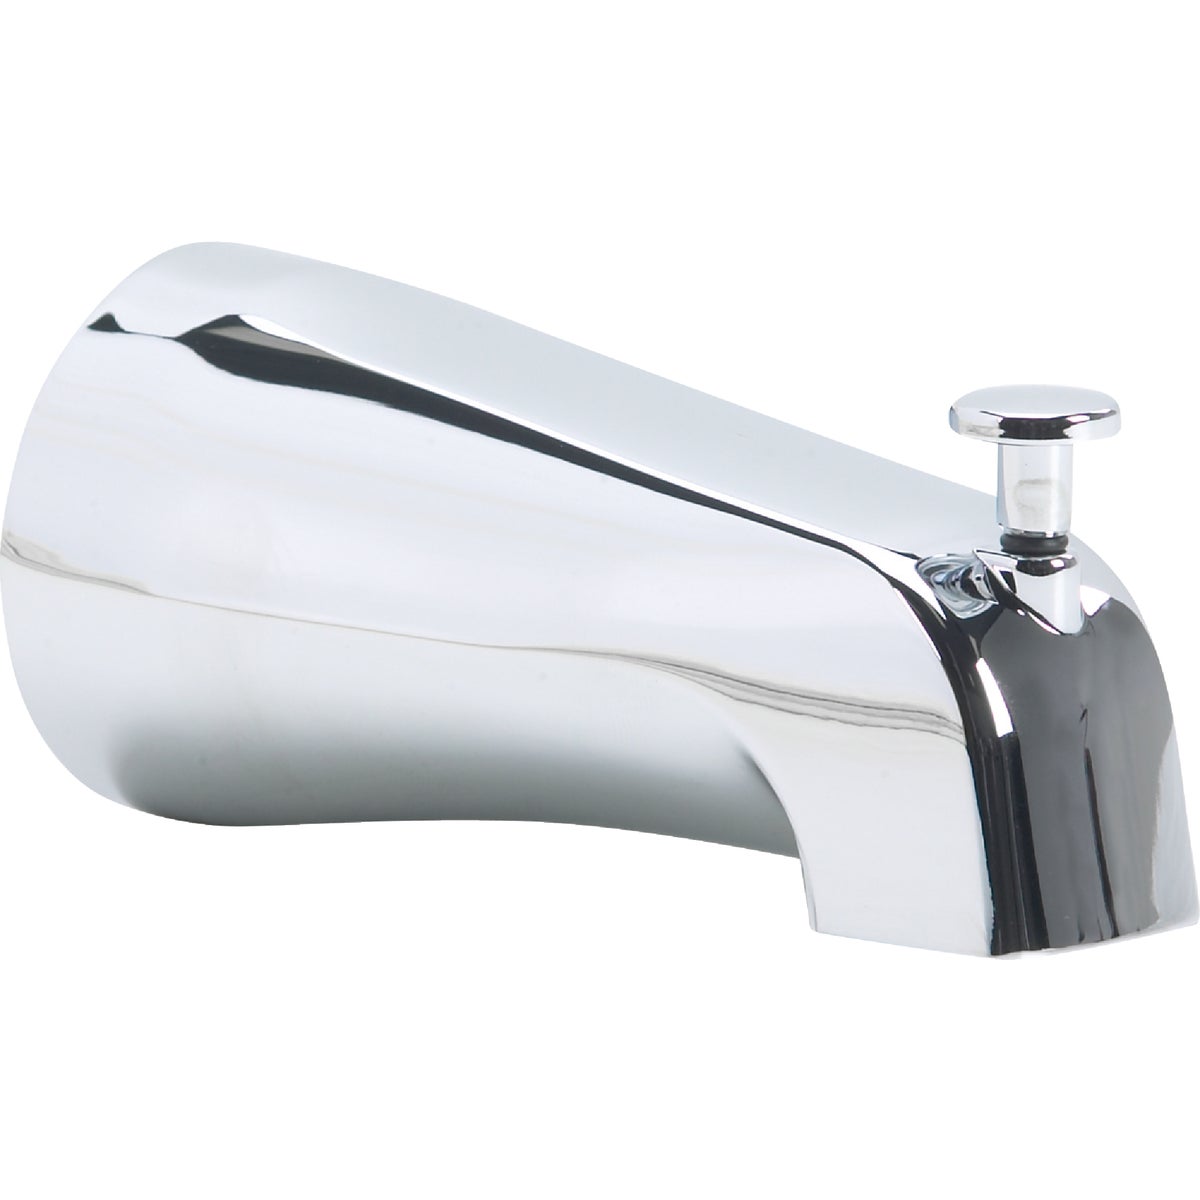 Item 450639, Diverter bath spout with slip fit connection for any shower